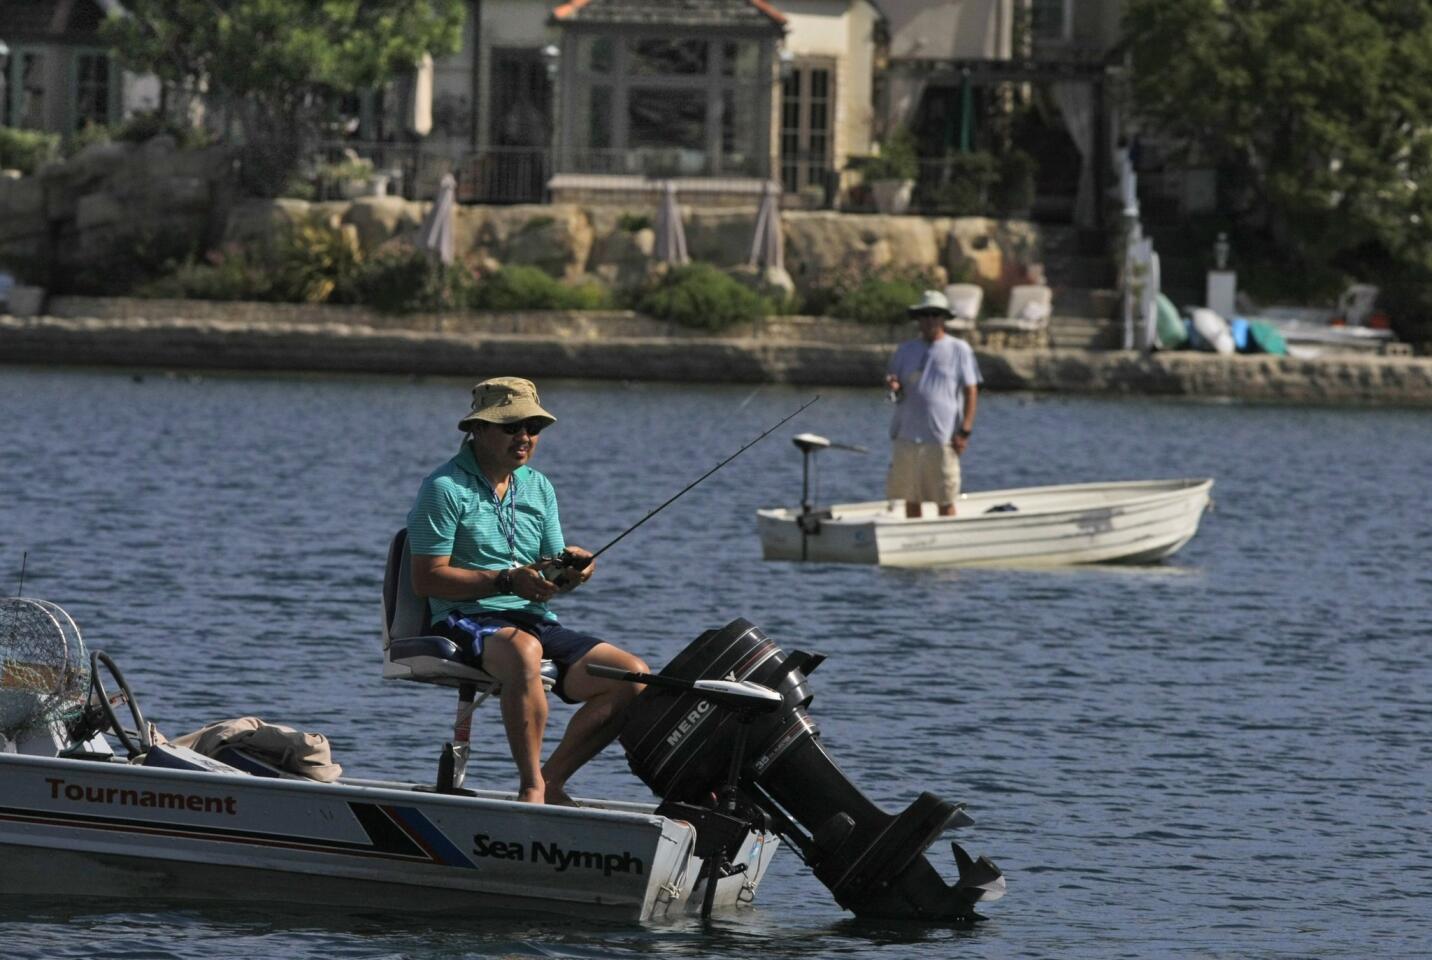 Fishermen try their luck in Lake Mission Viejo, a manufactured body of water in south Orange County.